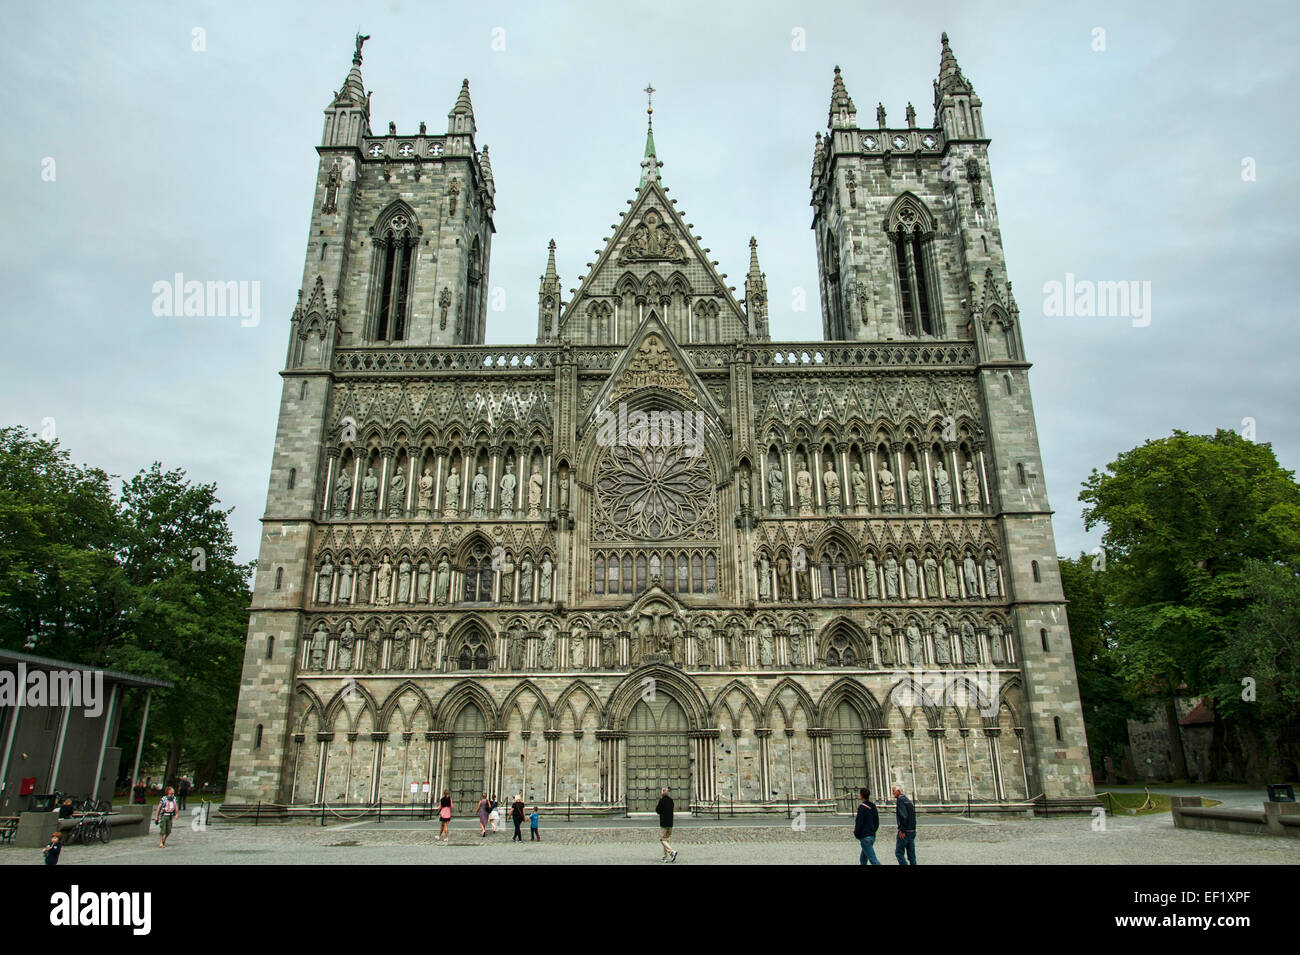 the-nidaros-cathedral-in-trondheim-norway-built-over-the-burial-site-EF1XPF.jpg